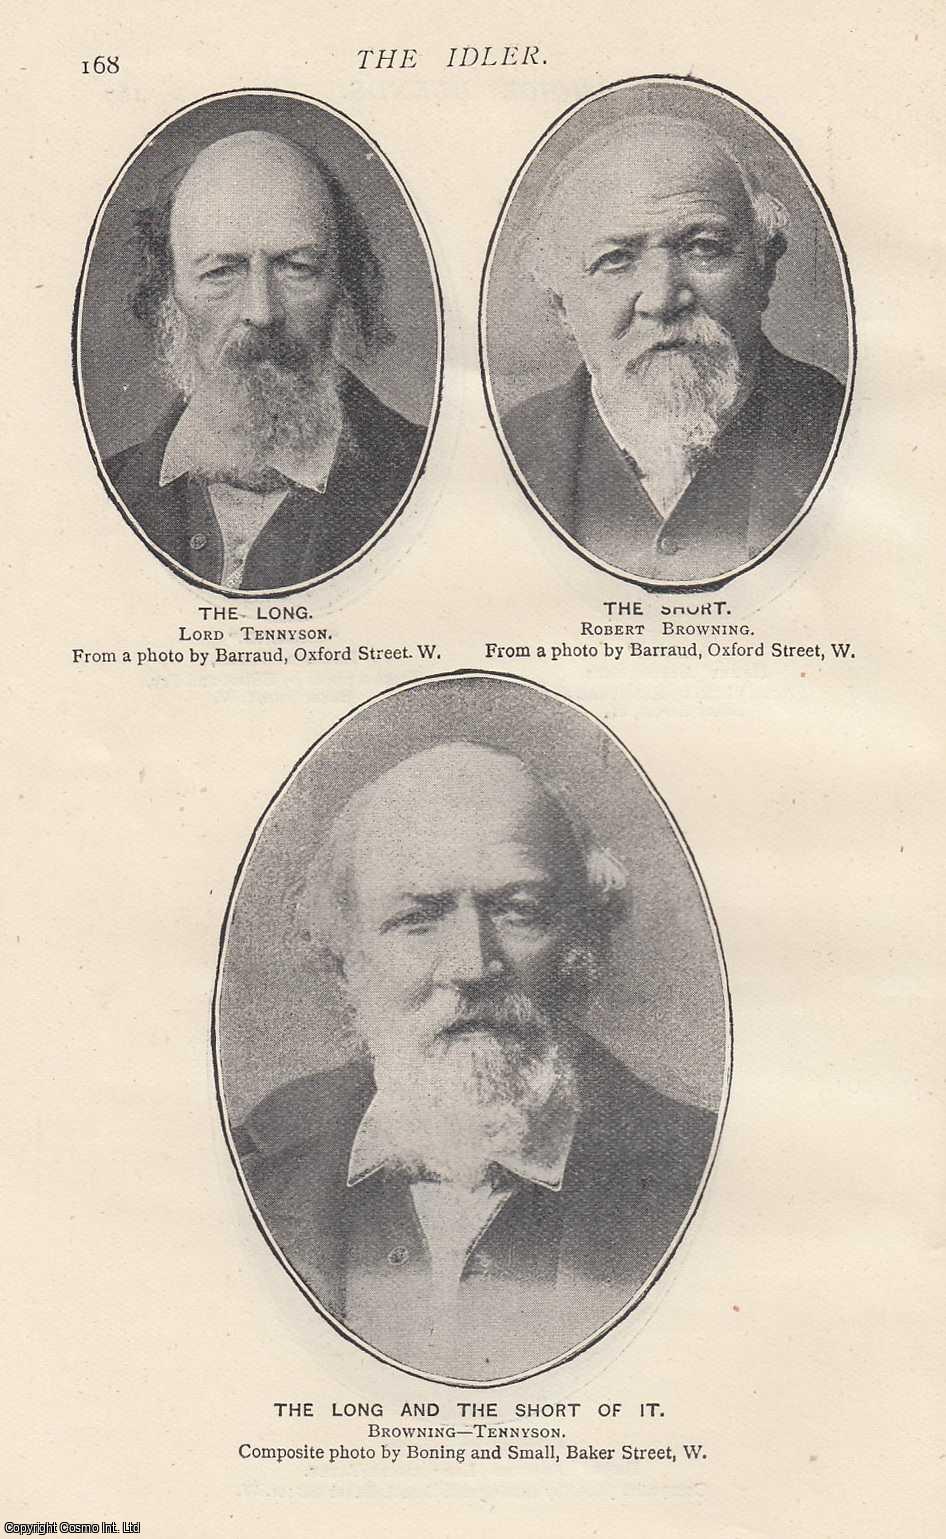 PHOTOGRAPHY - Choice Blends. Photographs of famous personages blended together; Politicians, Lawyers, Cambridge & Oxford Rowers, Poets. An original article from the Idler Magazine, 1893.